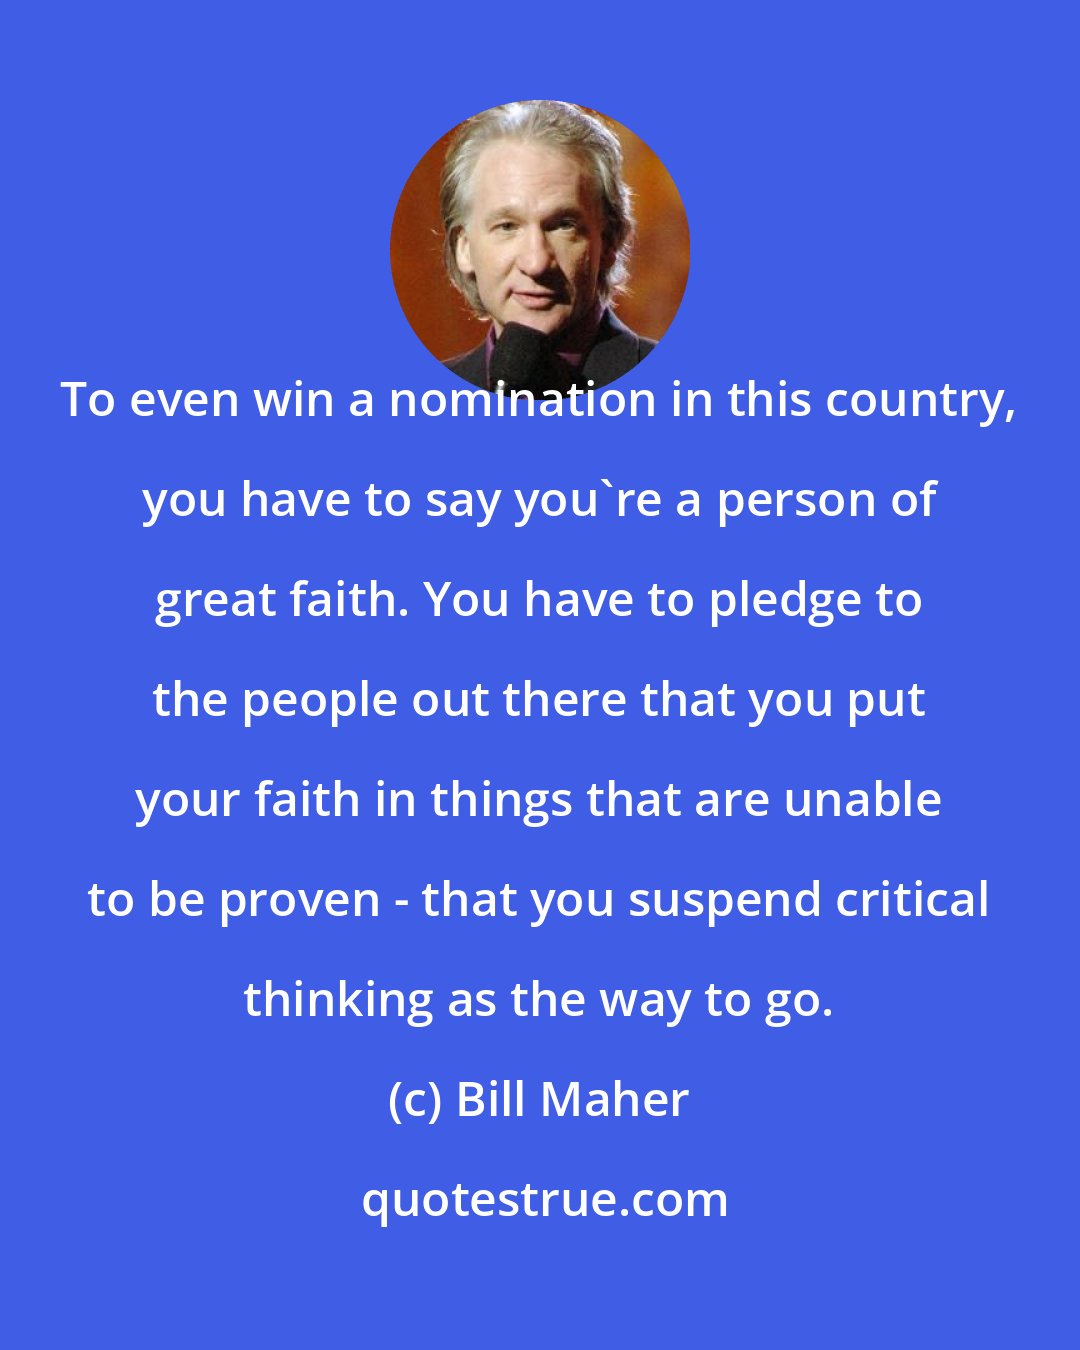 Bill Maher: To even win a nomination in this country, you have to say you're a person of great faith. You have to pledge to the people out there that you put your faith in things that are unable to be proven - that you suspend critical thinking as the way to go.